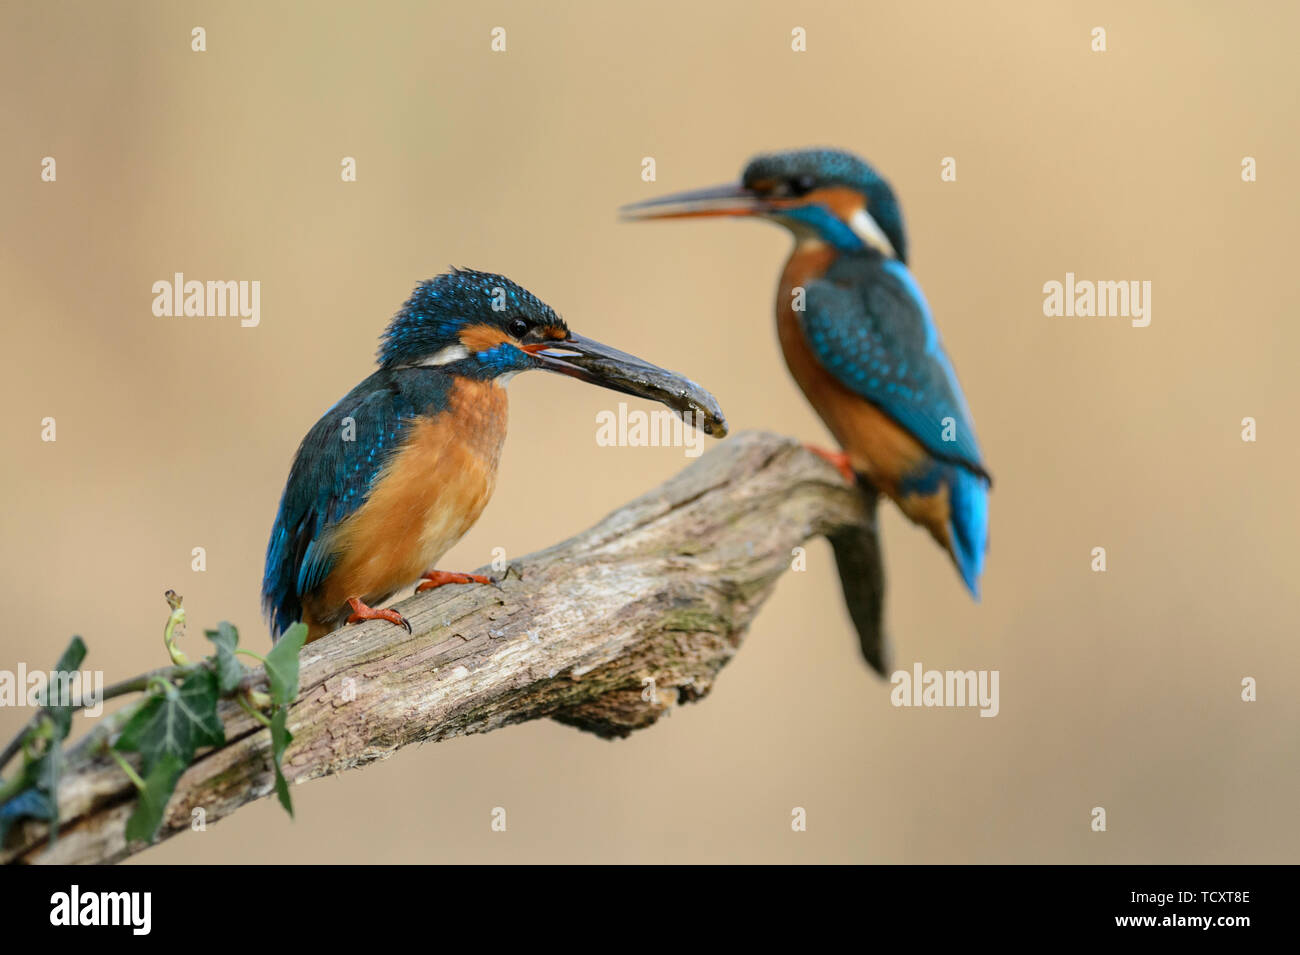 Pair of Kingfishers in courtship season with the male passing a fish to the female, which is blurry in the background Stock Photo